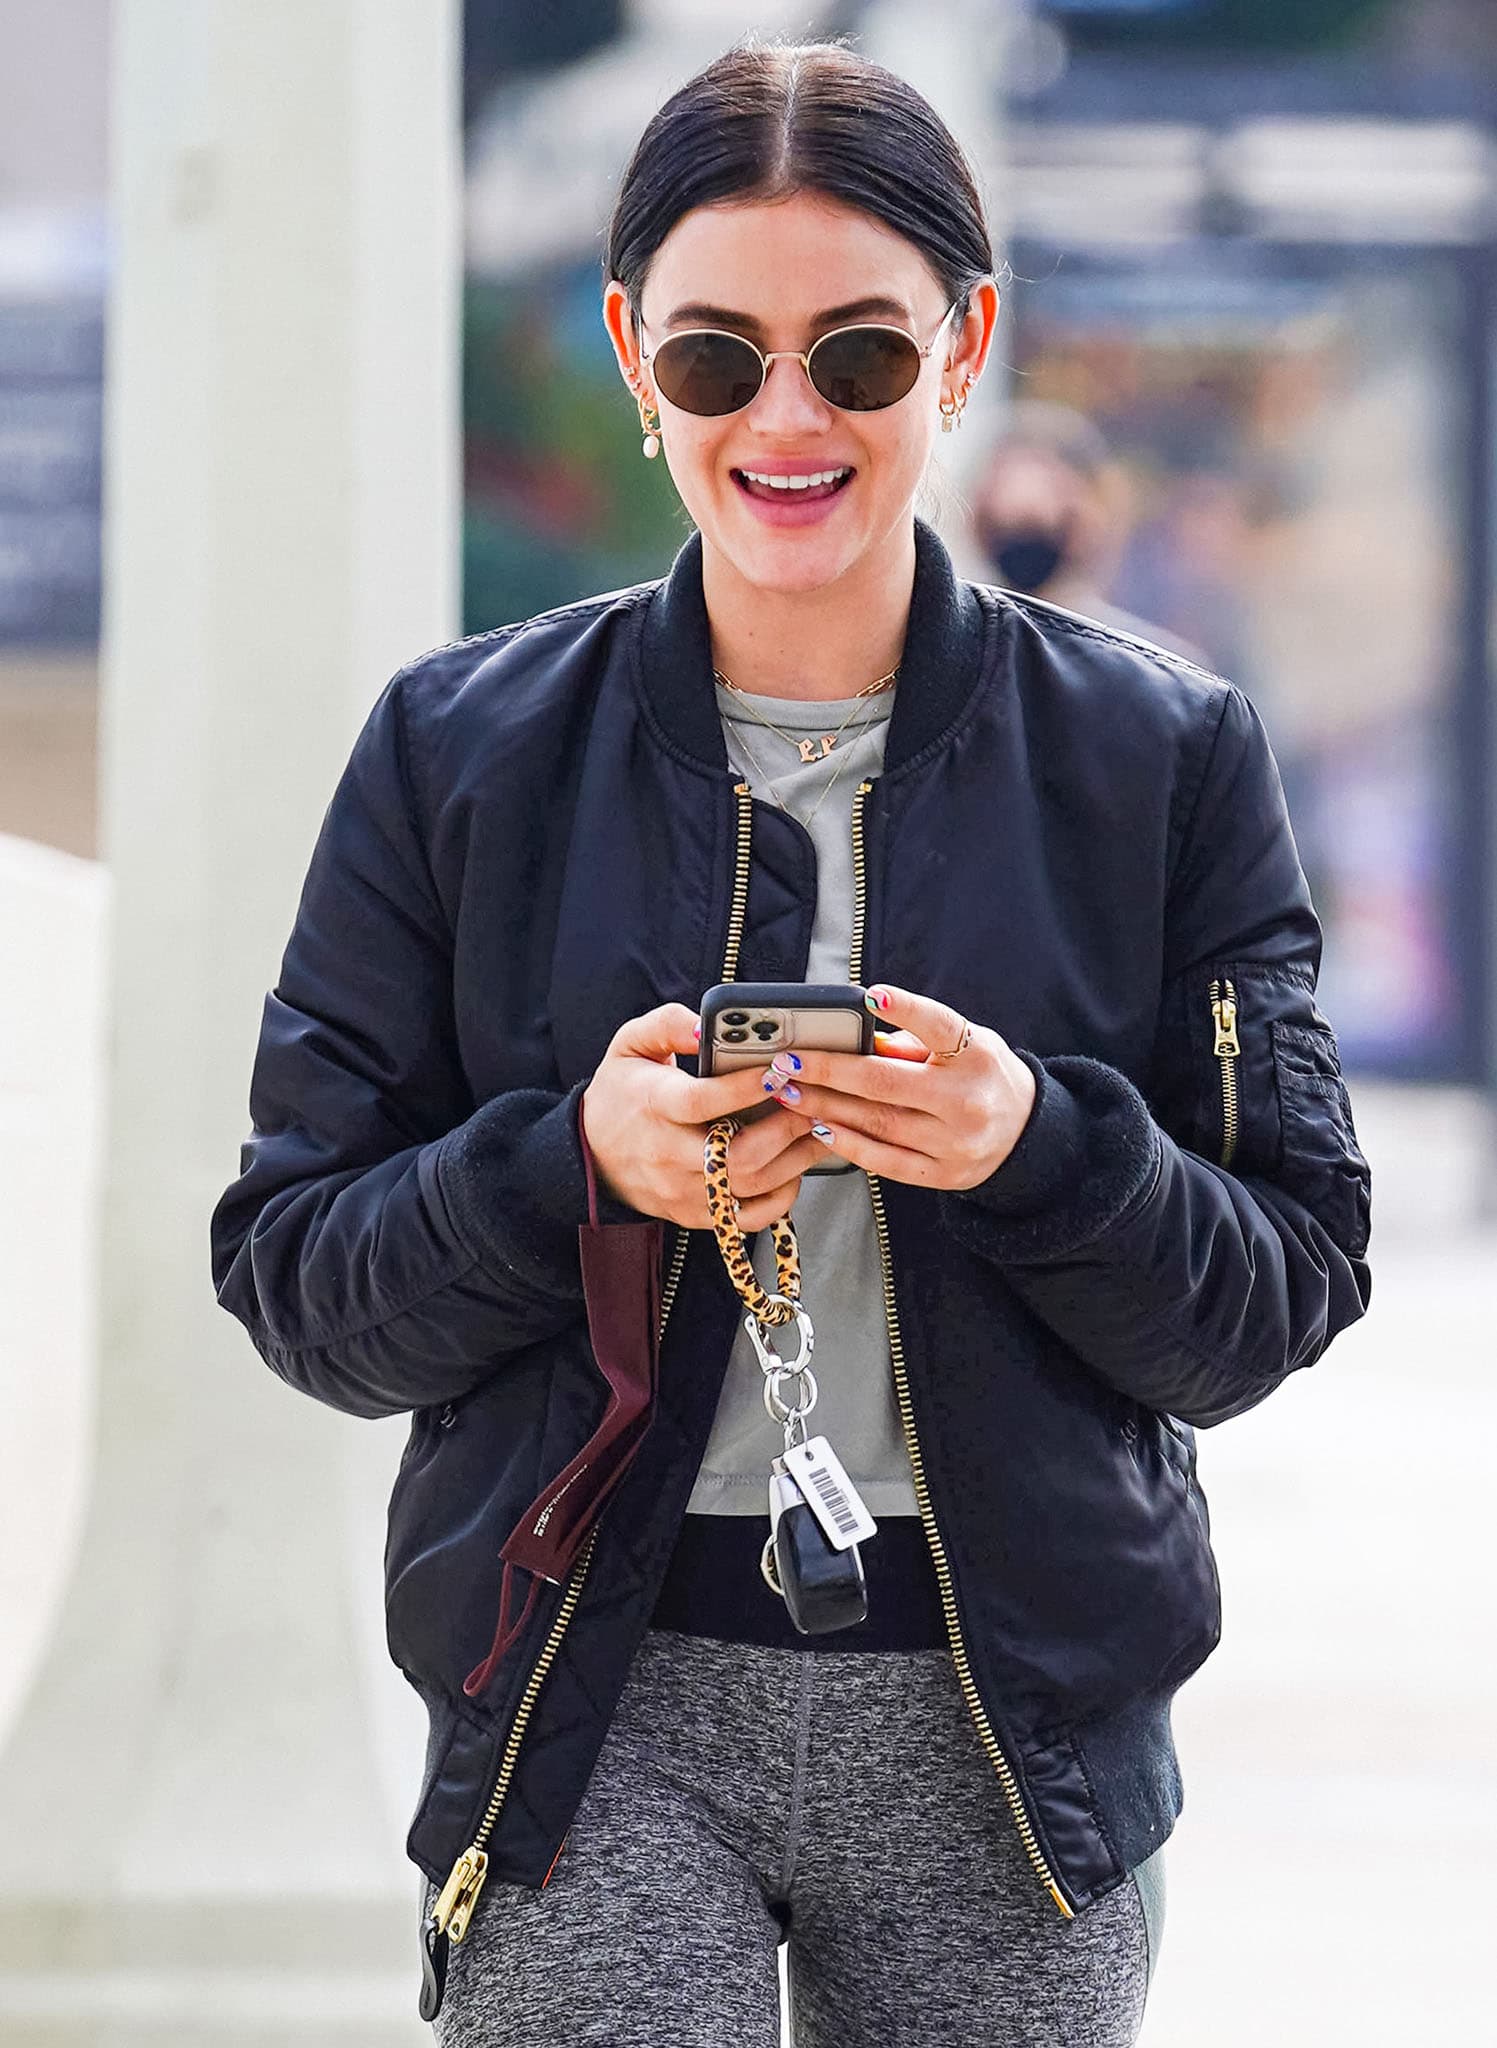 Lucy Hale flashes her pearly whites as she styles her athleisure with gold jewelry